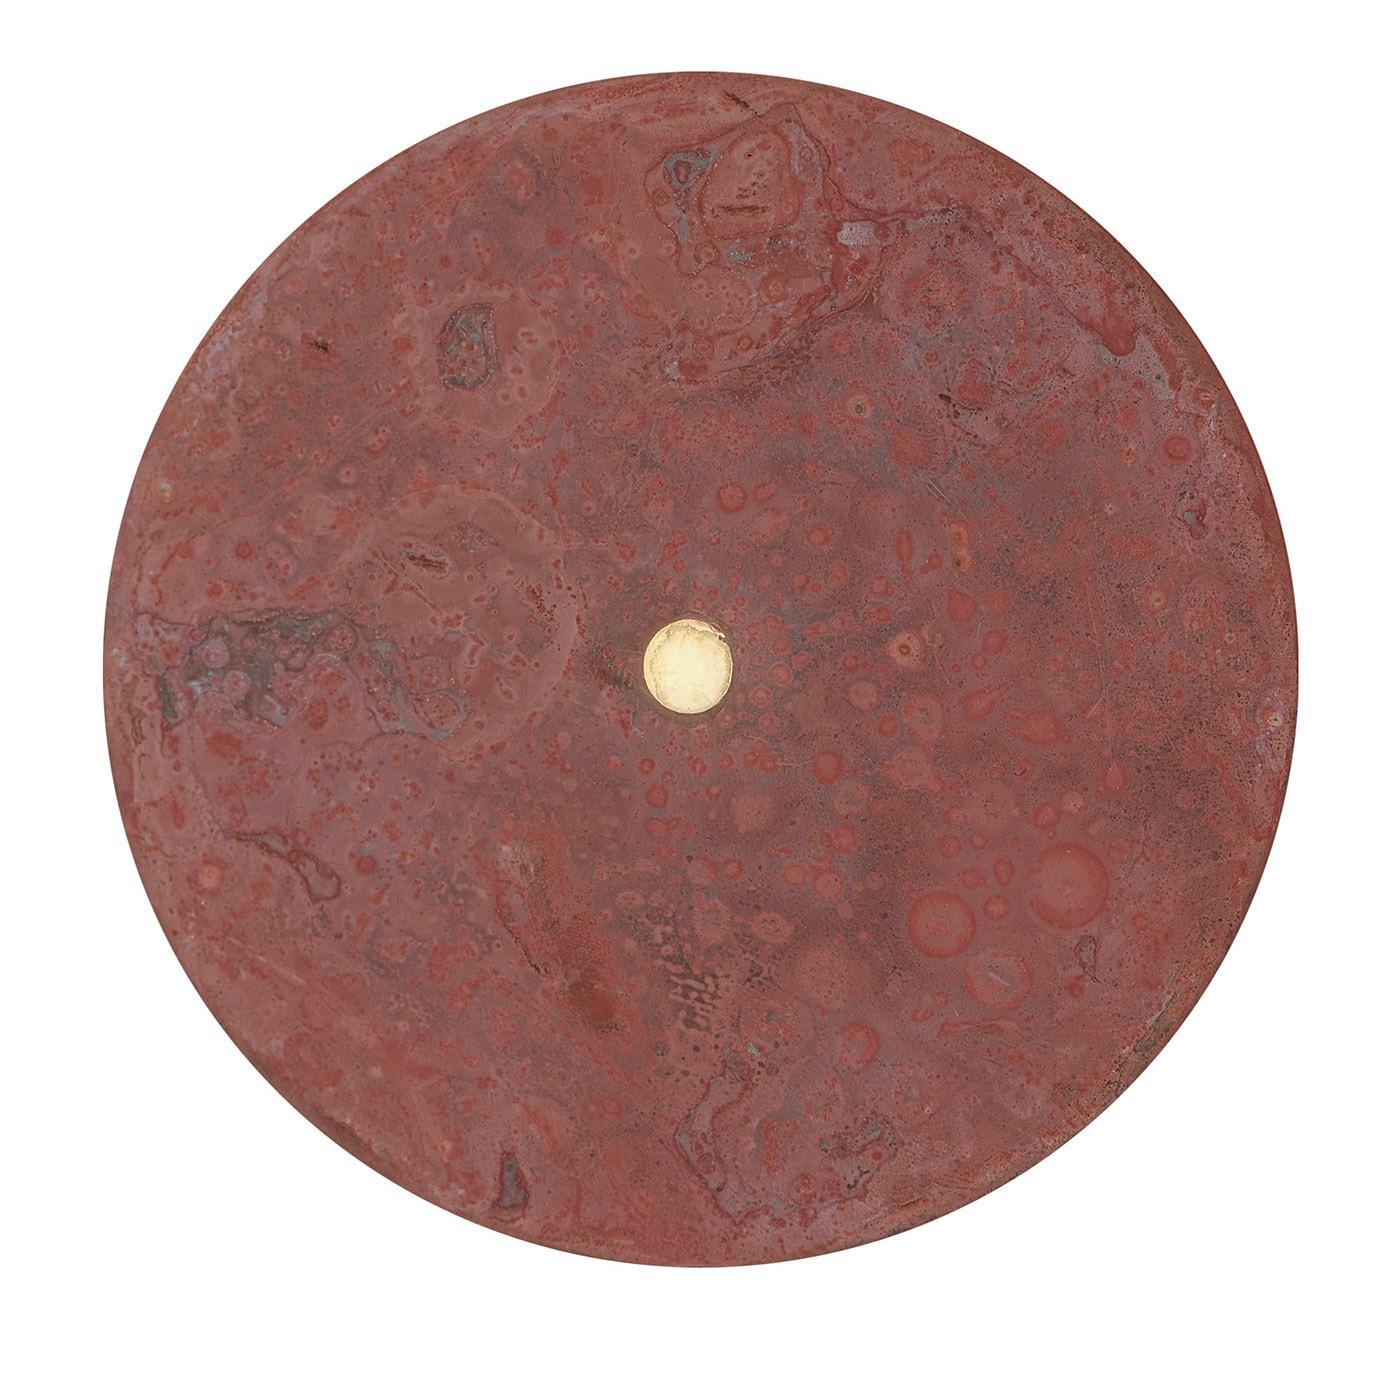 This artisan set of six coasters will infuse any table setting with its timeless charm. Deftly handcrafted of brass, each piece showcases unique traceries and hues resulting from oxidizing processes. An antioxidant layer protects the piece, which is